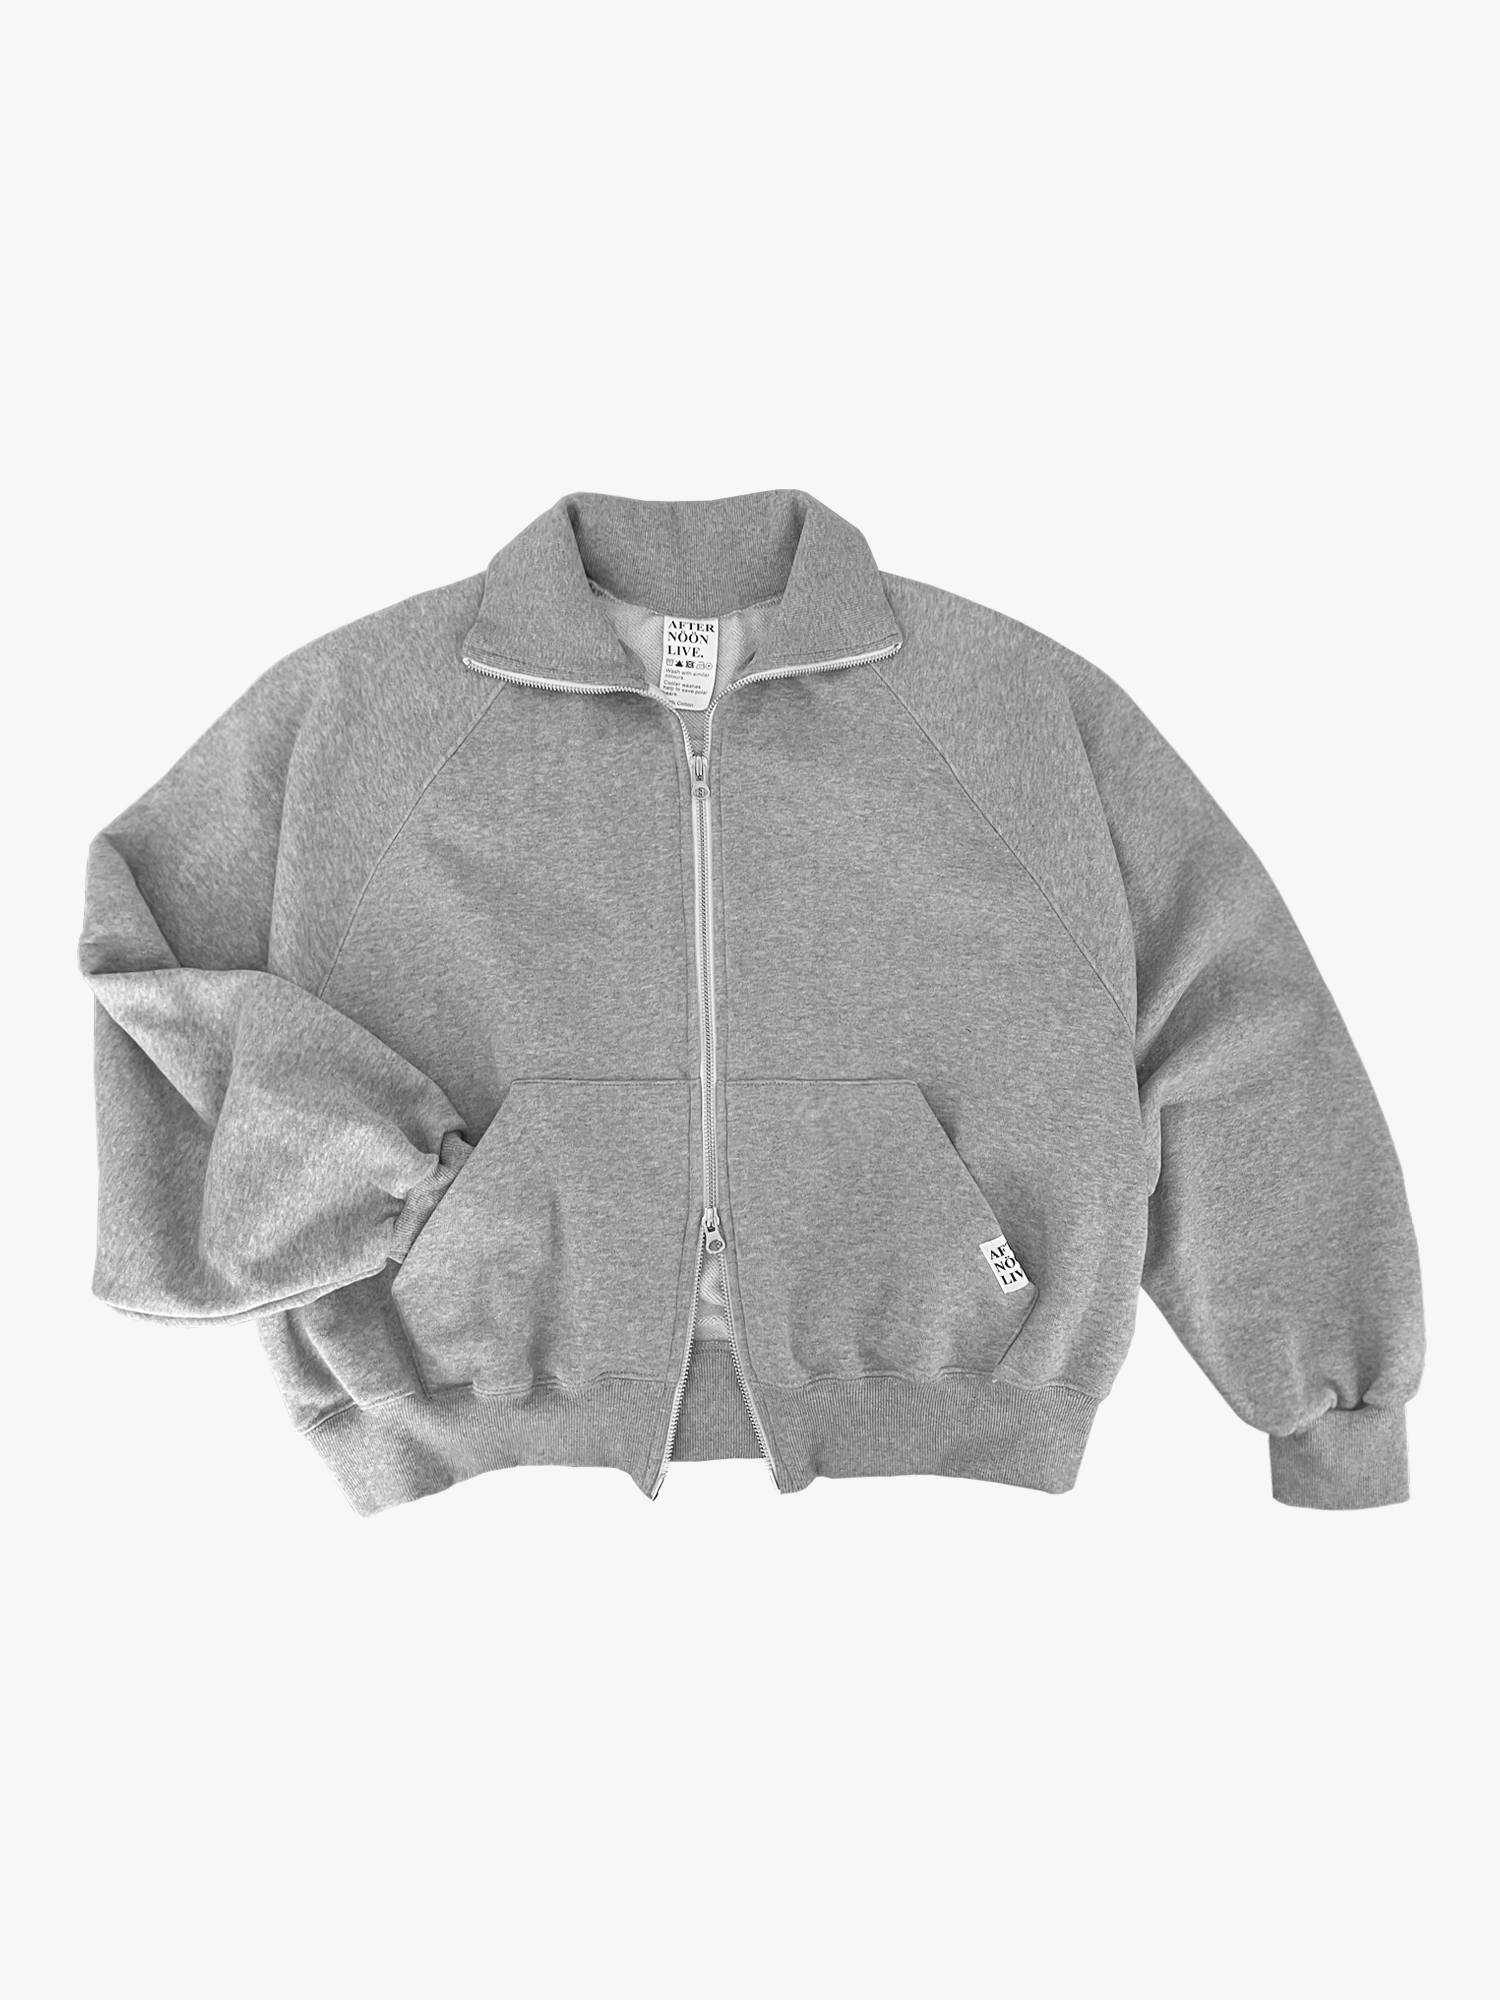 Afternoonlive Easy Two-way Zip-up (Light Gray)